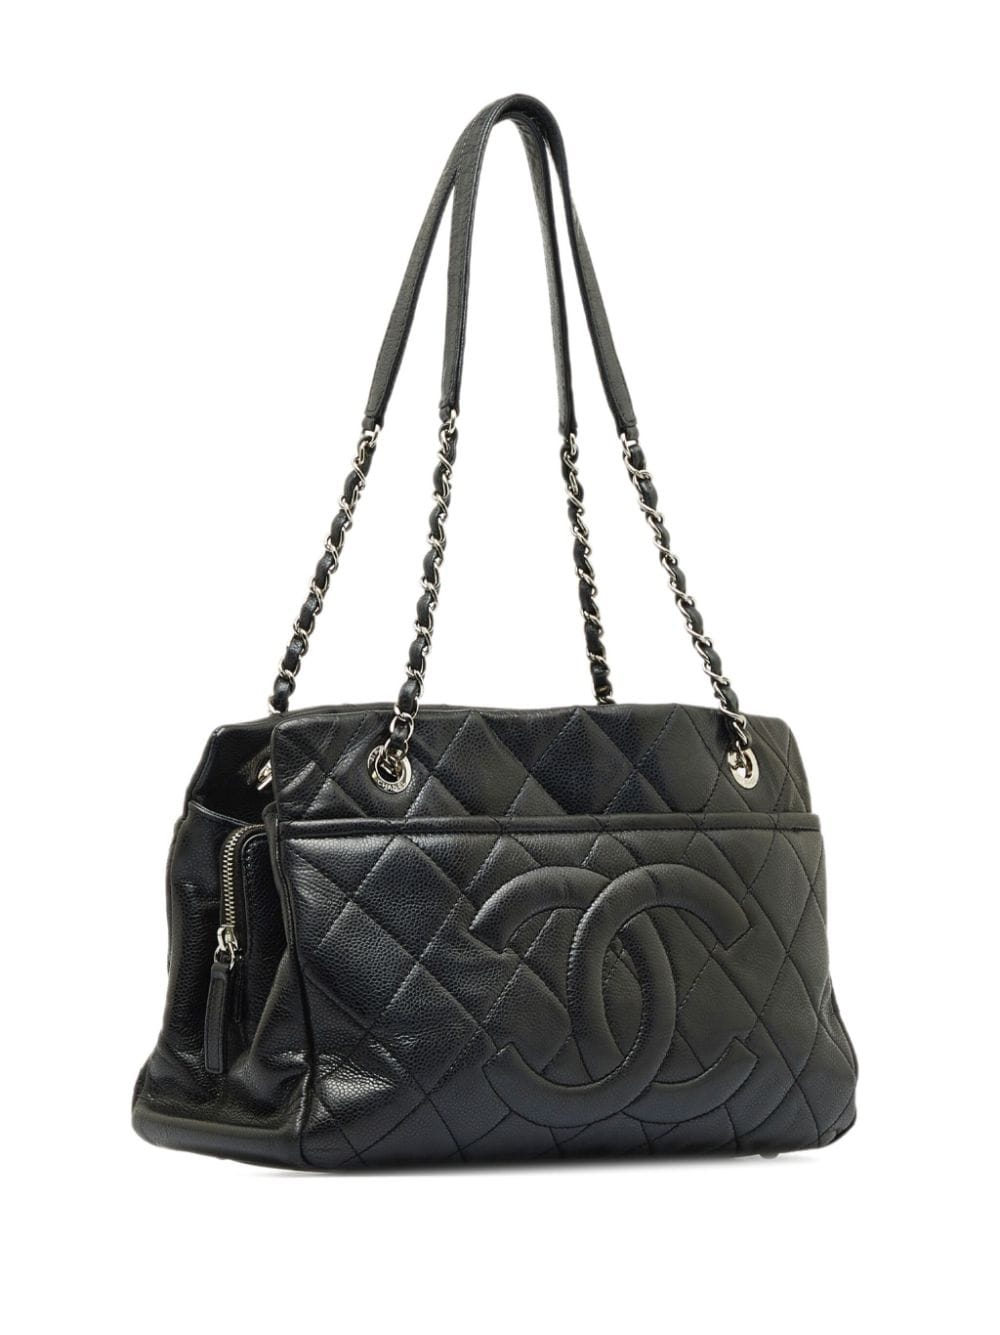 Pre-owned Chanel 2013/2014 Cc Tote Bag In Black